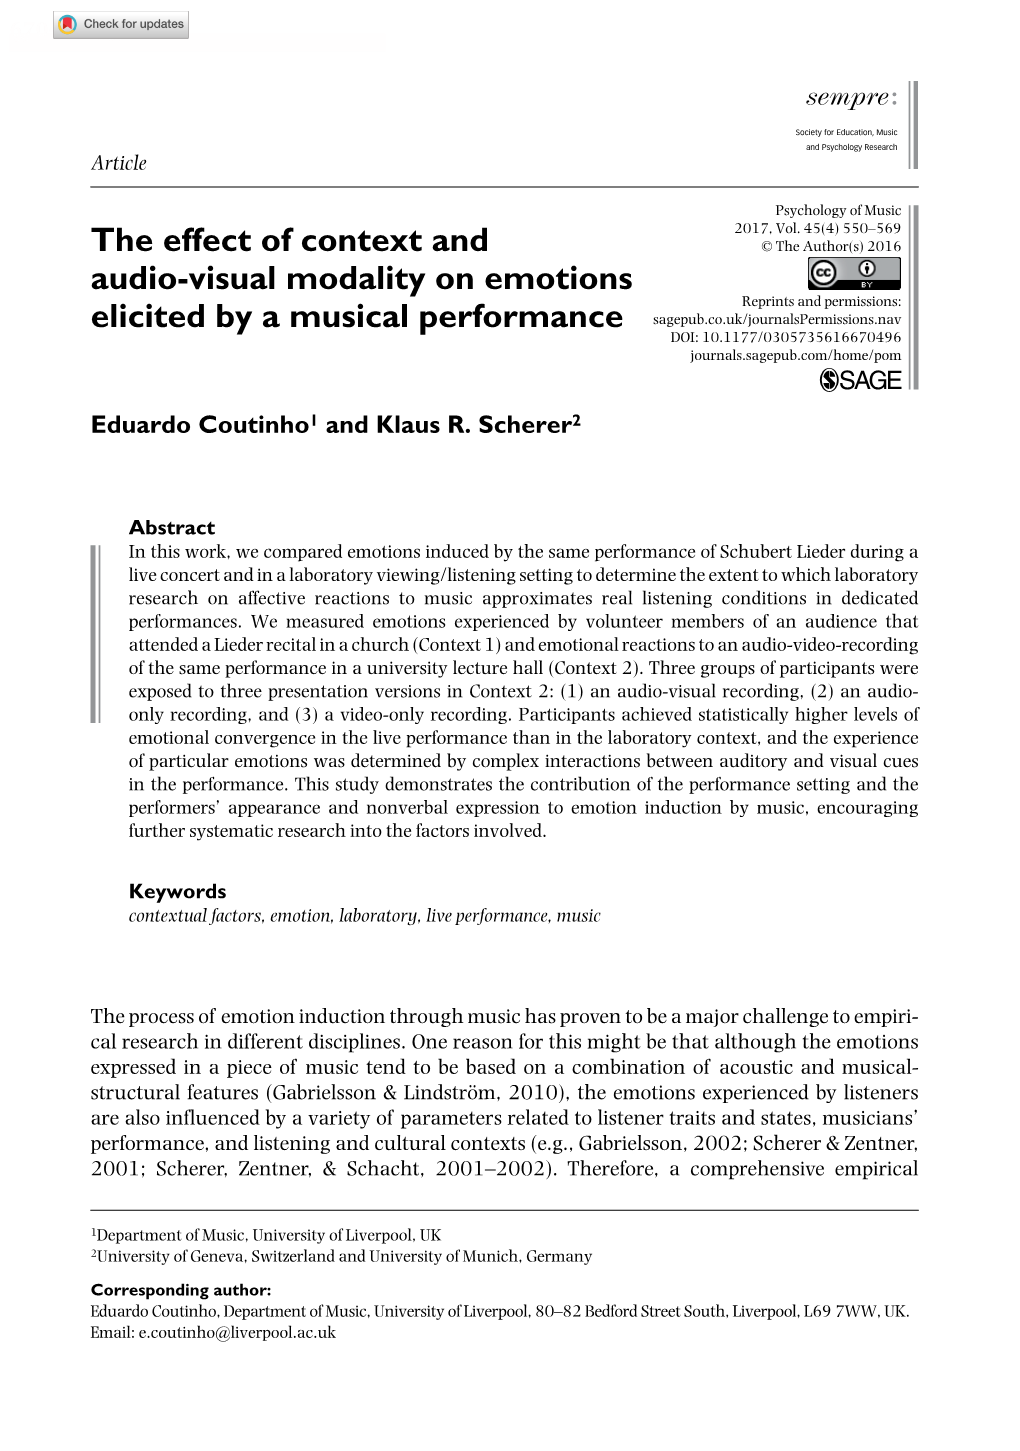 The Effect of Context and Audio-Visual Modality on Emotions Elicited by A